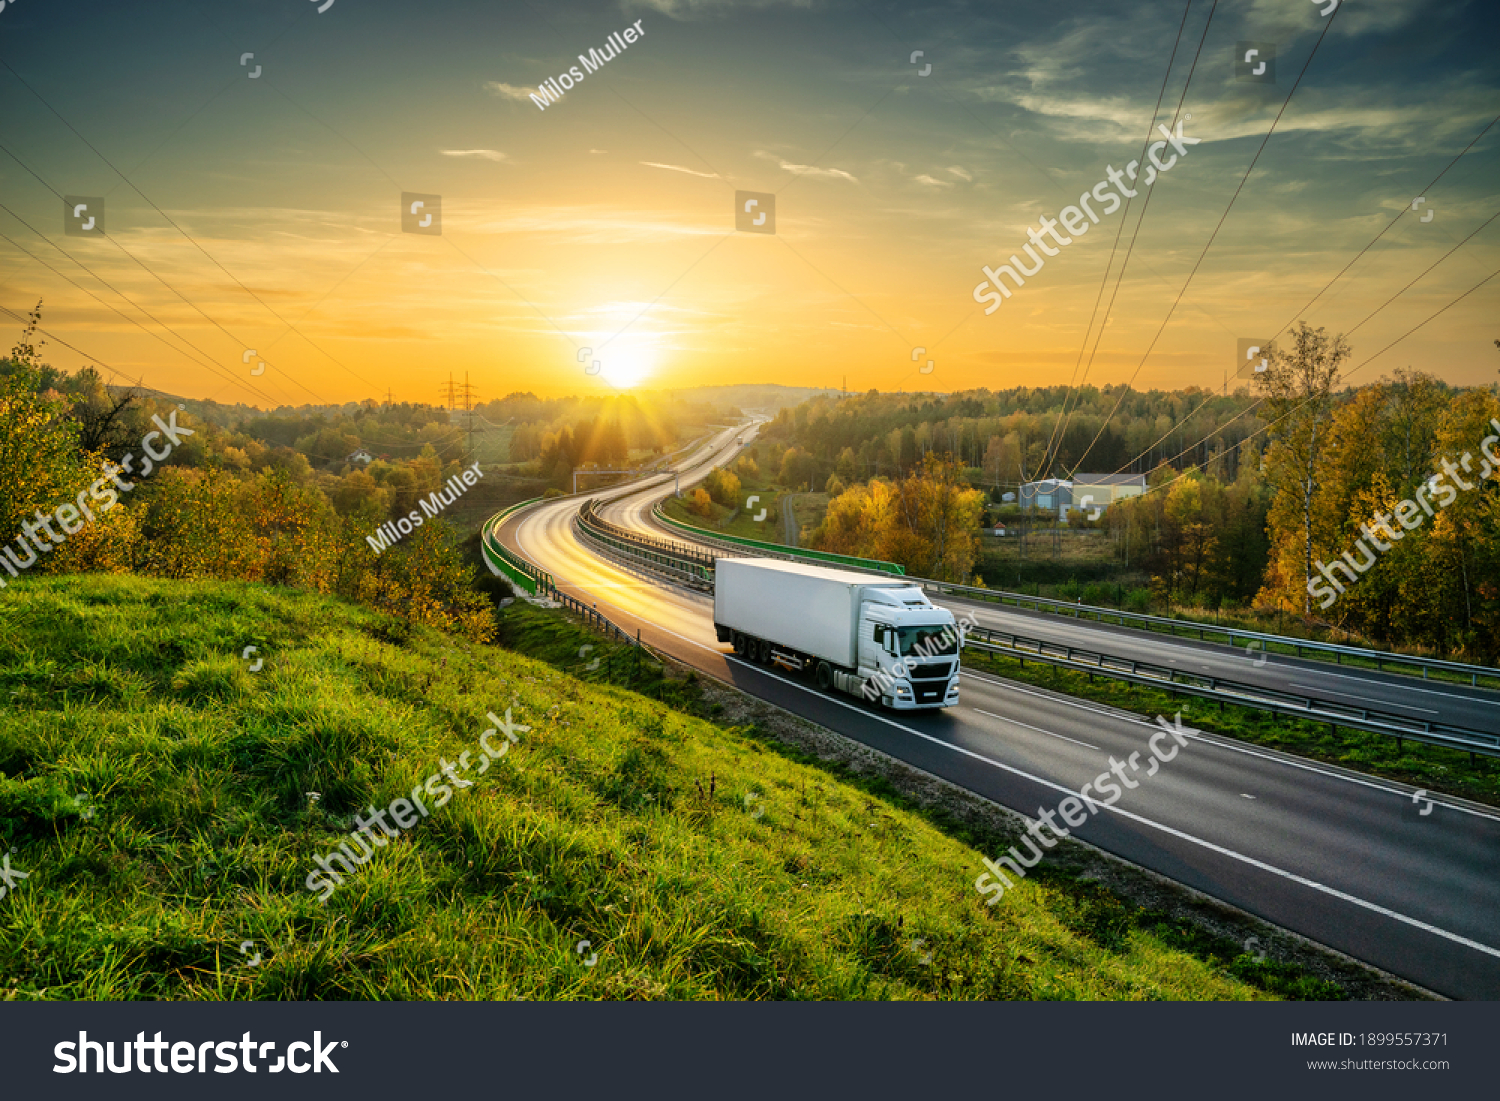 White truck driving on the highway winding through forested landscape in autumn colors at sunset #1899557371